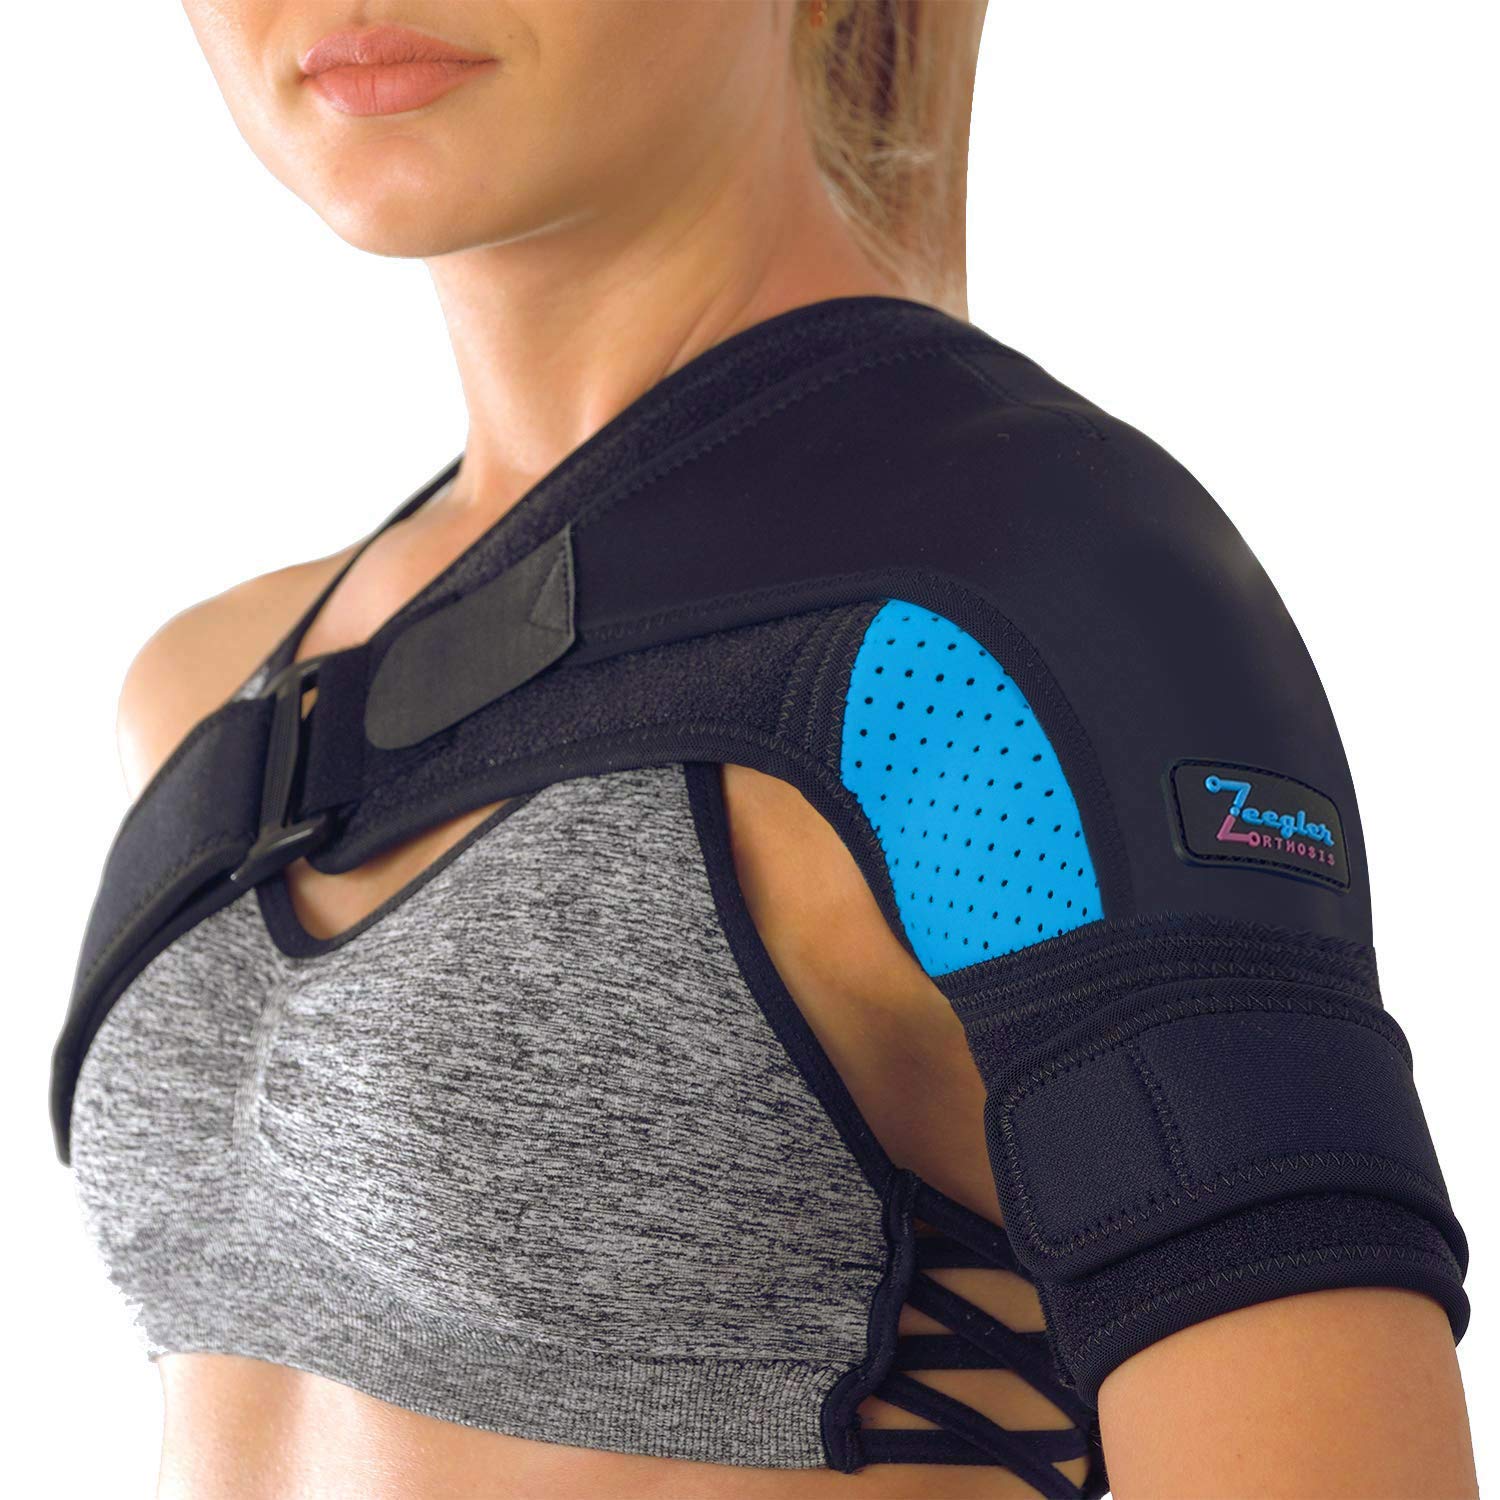 Shoulder Brace for Women and Men | Adjustable Compression Rotator Cuff  Support | for Arthritis | Injury Prevention | Dislocated AC Joints (Medium)…